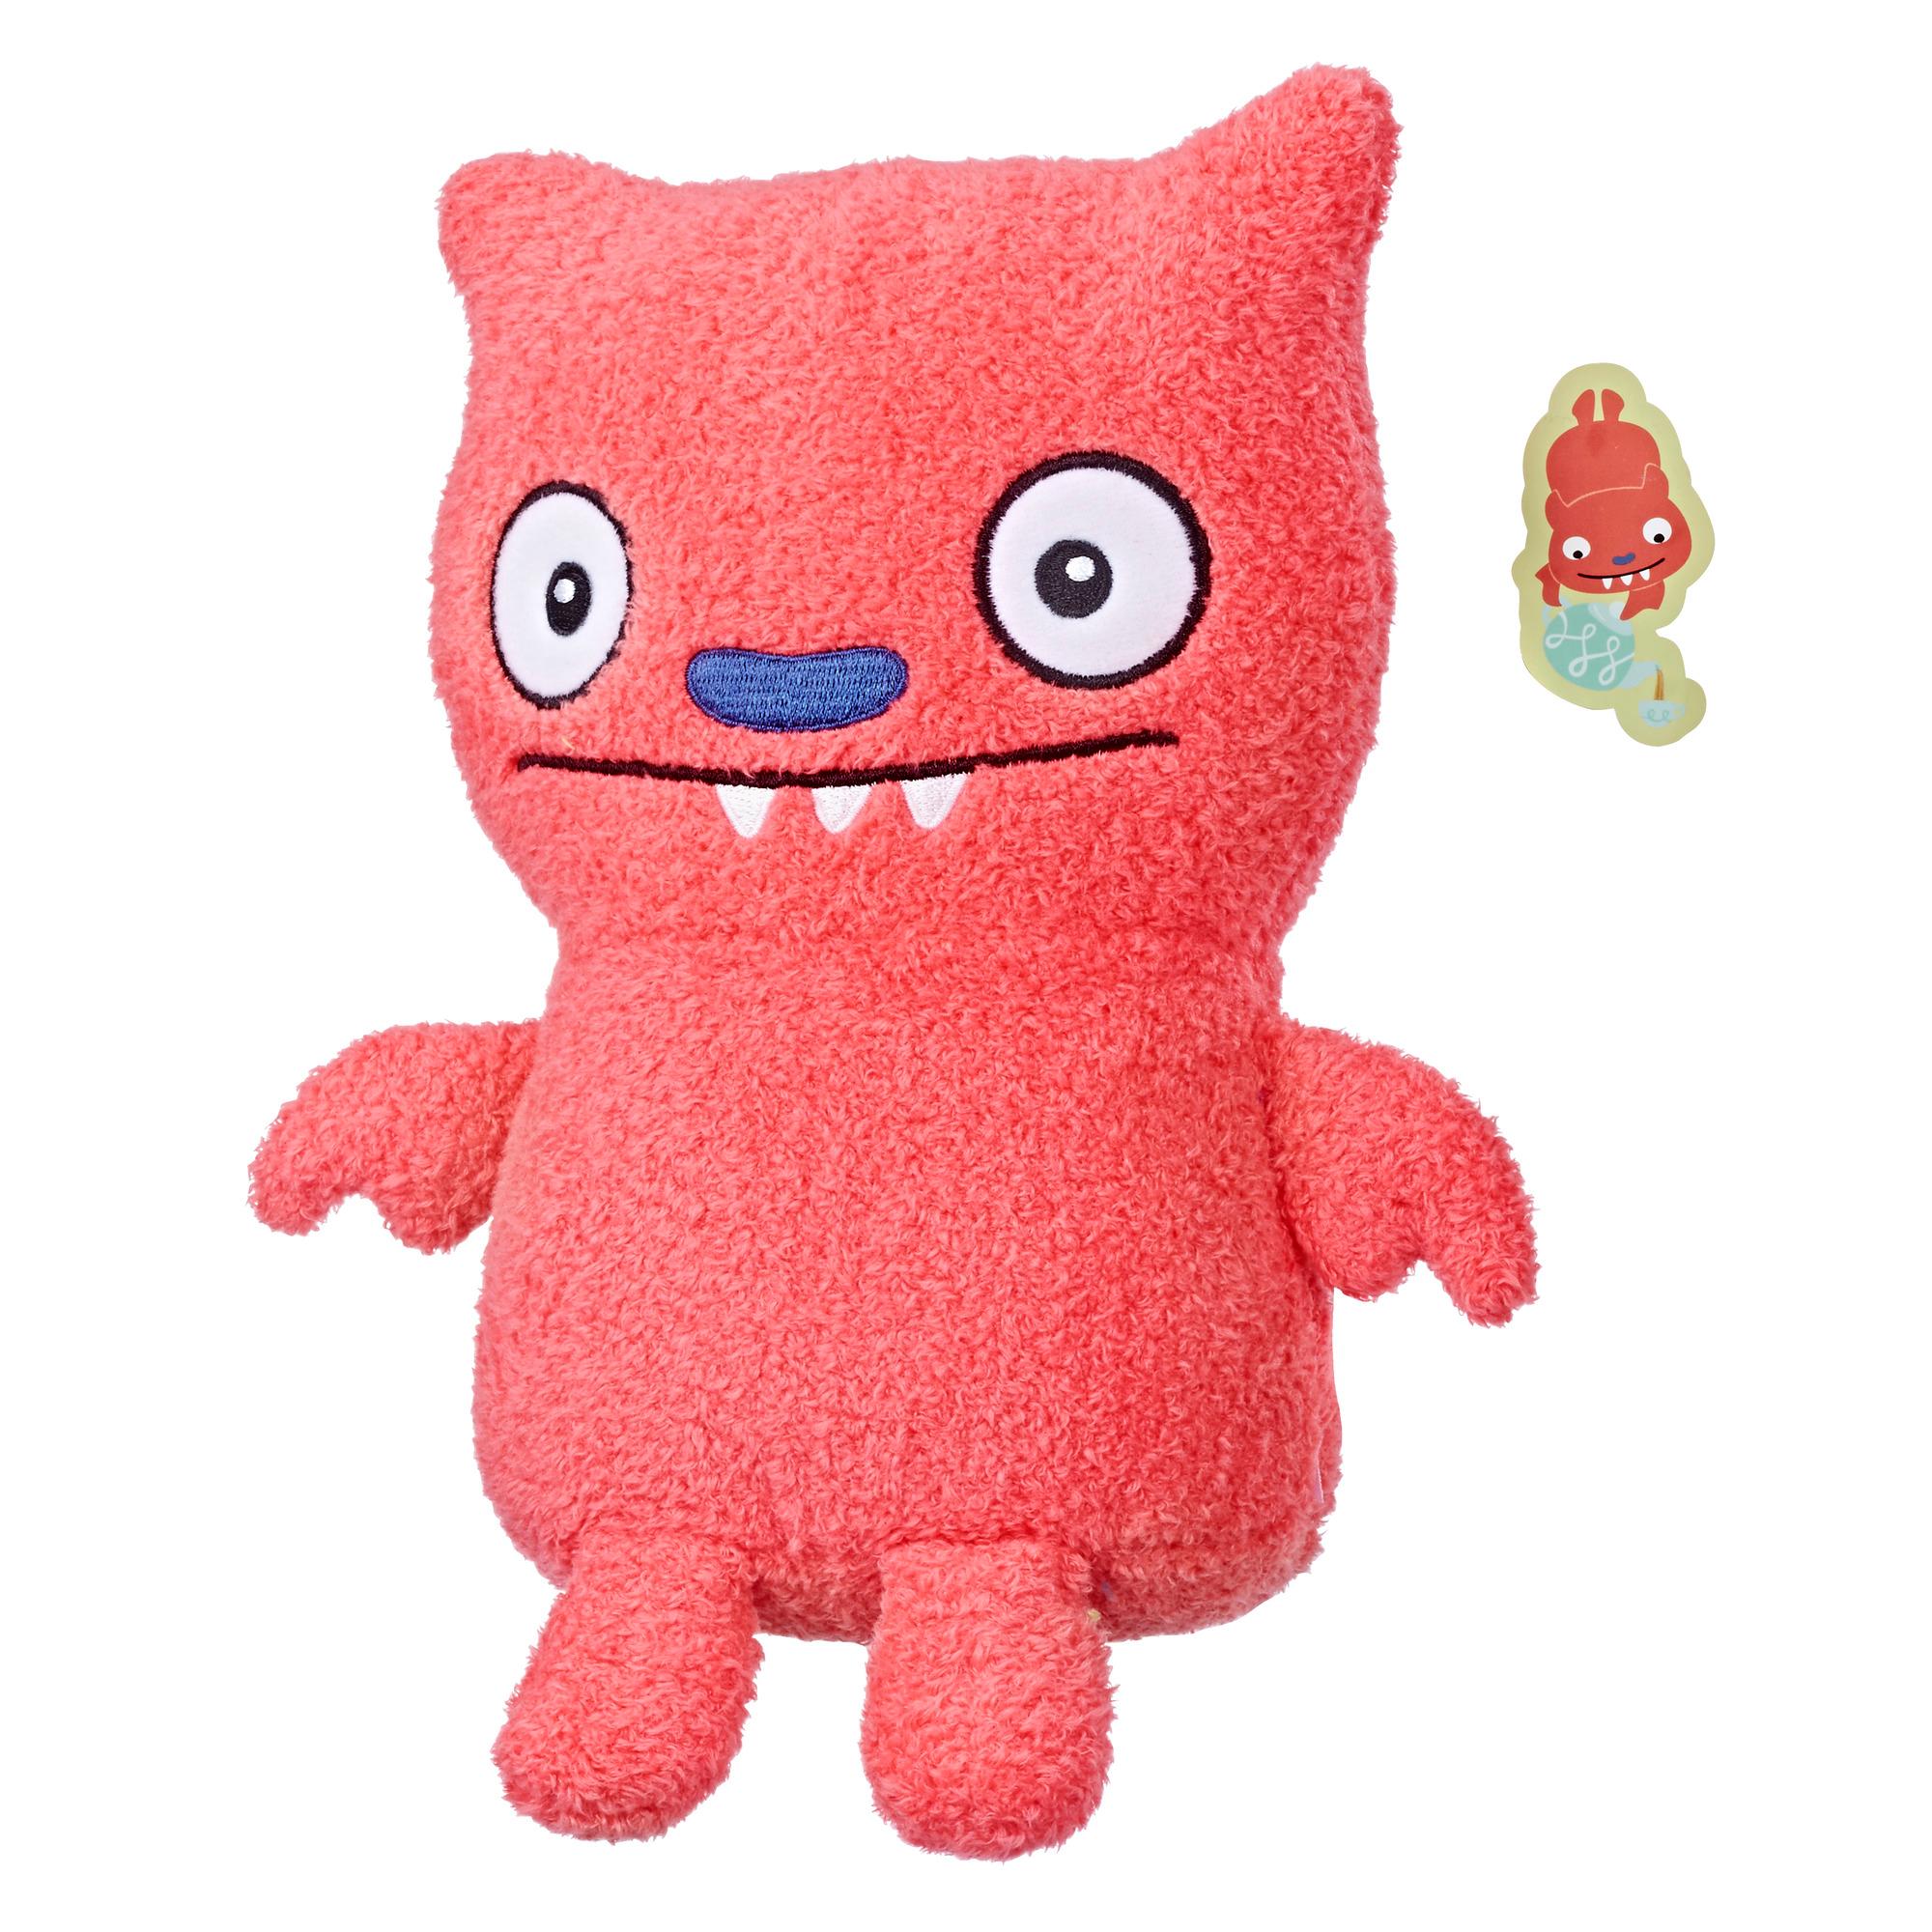 UglyDolls With Gratitude Lucky Bat Stuffed Plush Toy, 9.5 inches tall